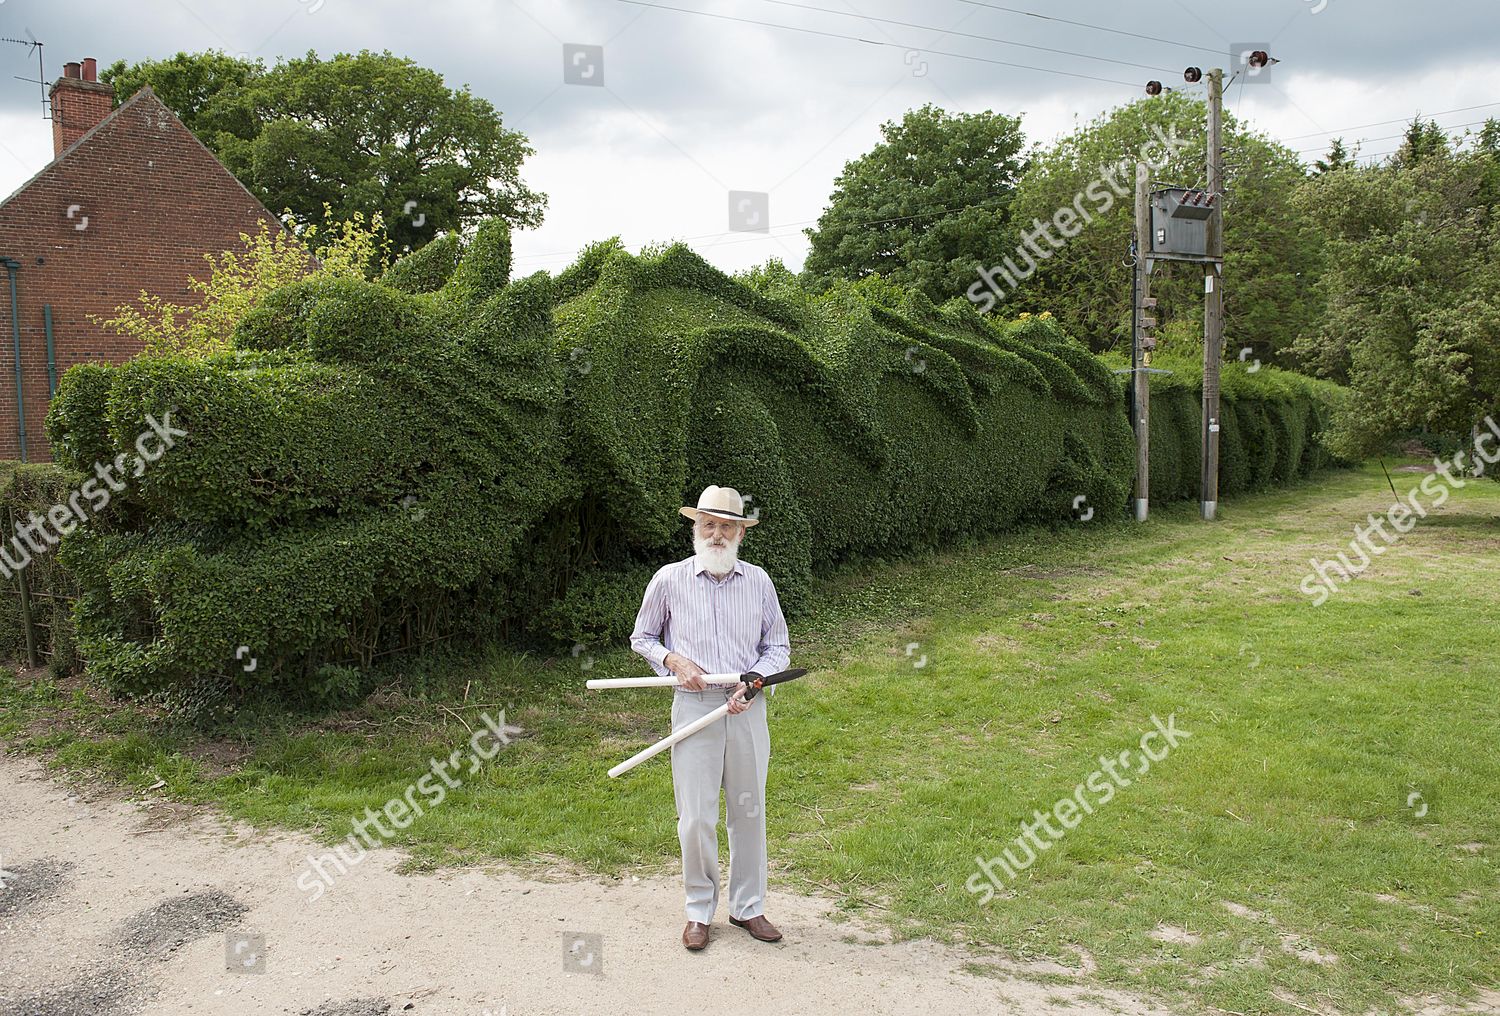 https://editorial01.shutterstock.com/wm-preview-1500/4827095a/dde1821c/retired-75-year-old-john-brooker-from-bagthorpe-norfolk-who-has-created-an-impressive-dragon-design-from-the-hedge-bordering-his-garden-the-former-fan-maker-got-his-inspiration-from-his-time-serving-for-the-army-in-the-far-east-in-the-1960s-npictu-shutterstock-editorial-4827095a.jpg